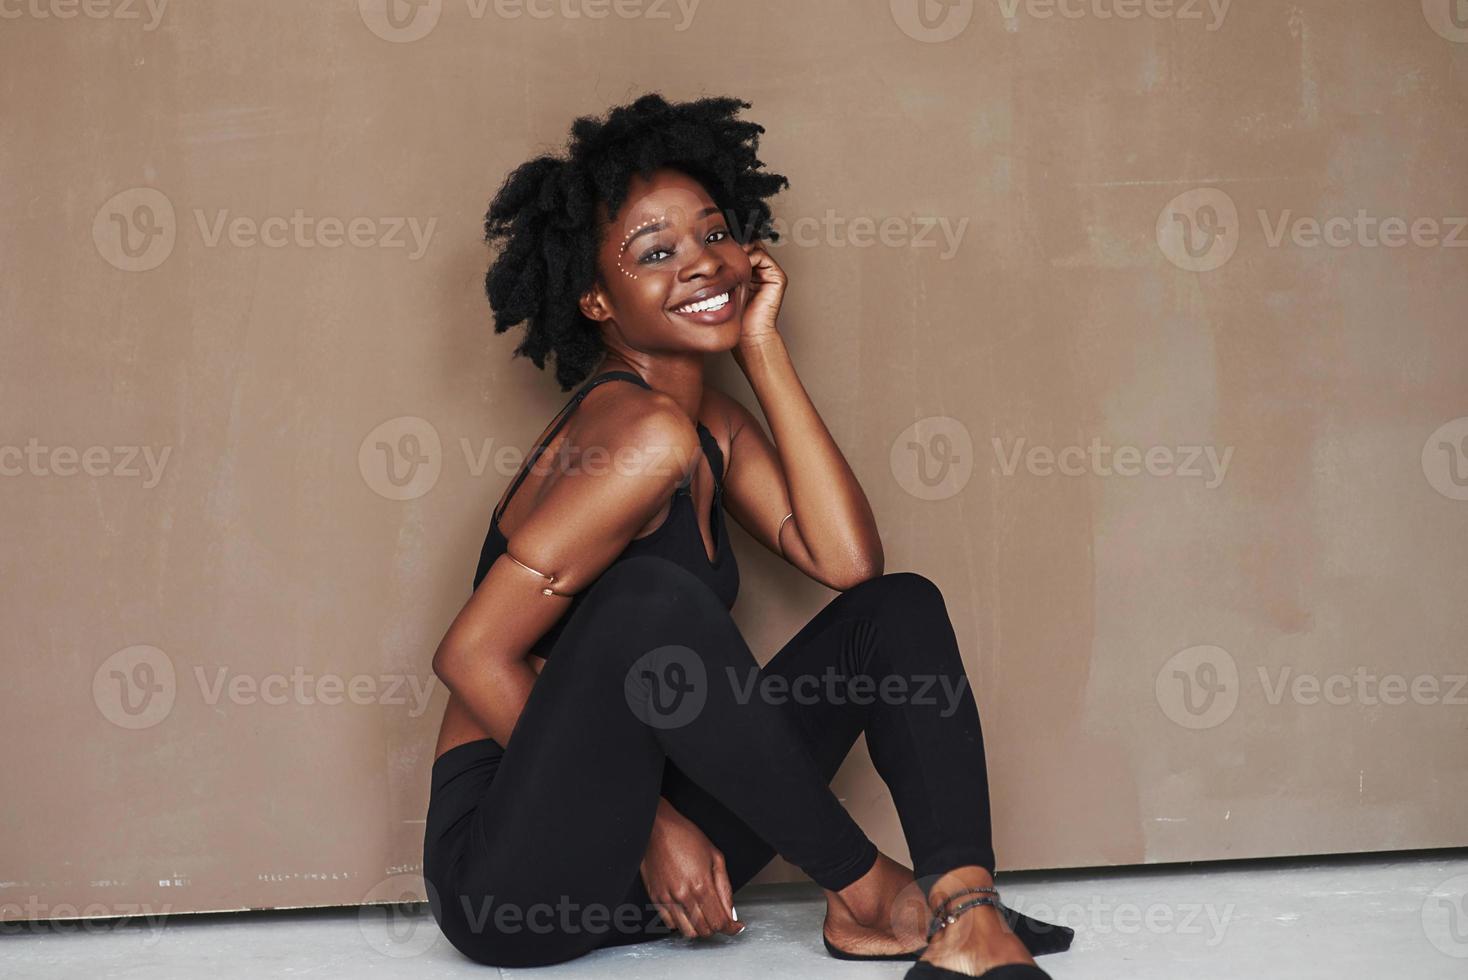 Sitting on the floor. Young beautiful afro american woman in the studio against brown background photo